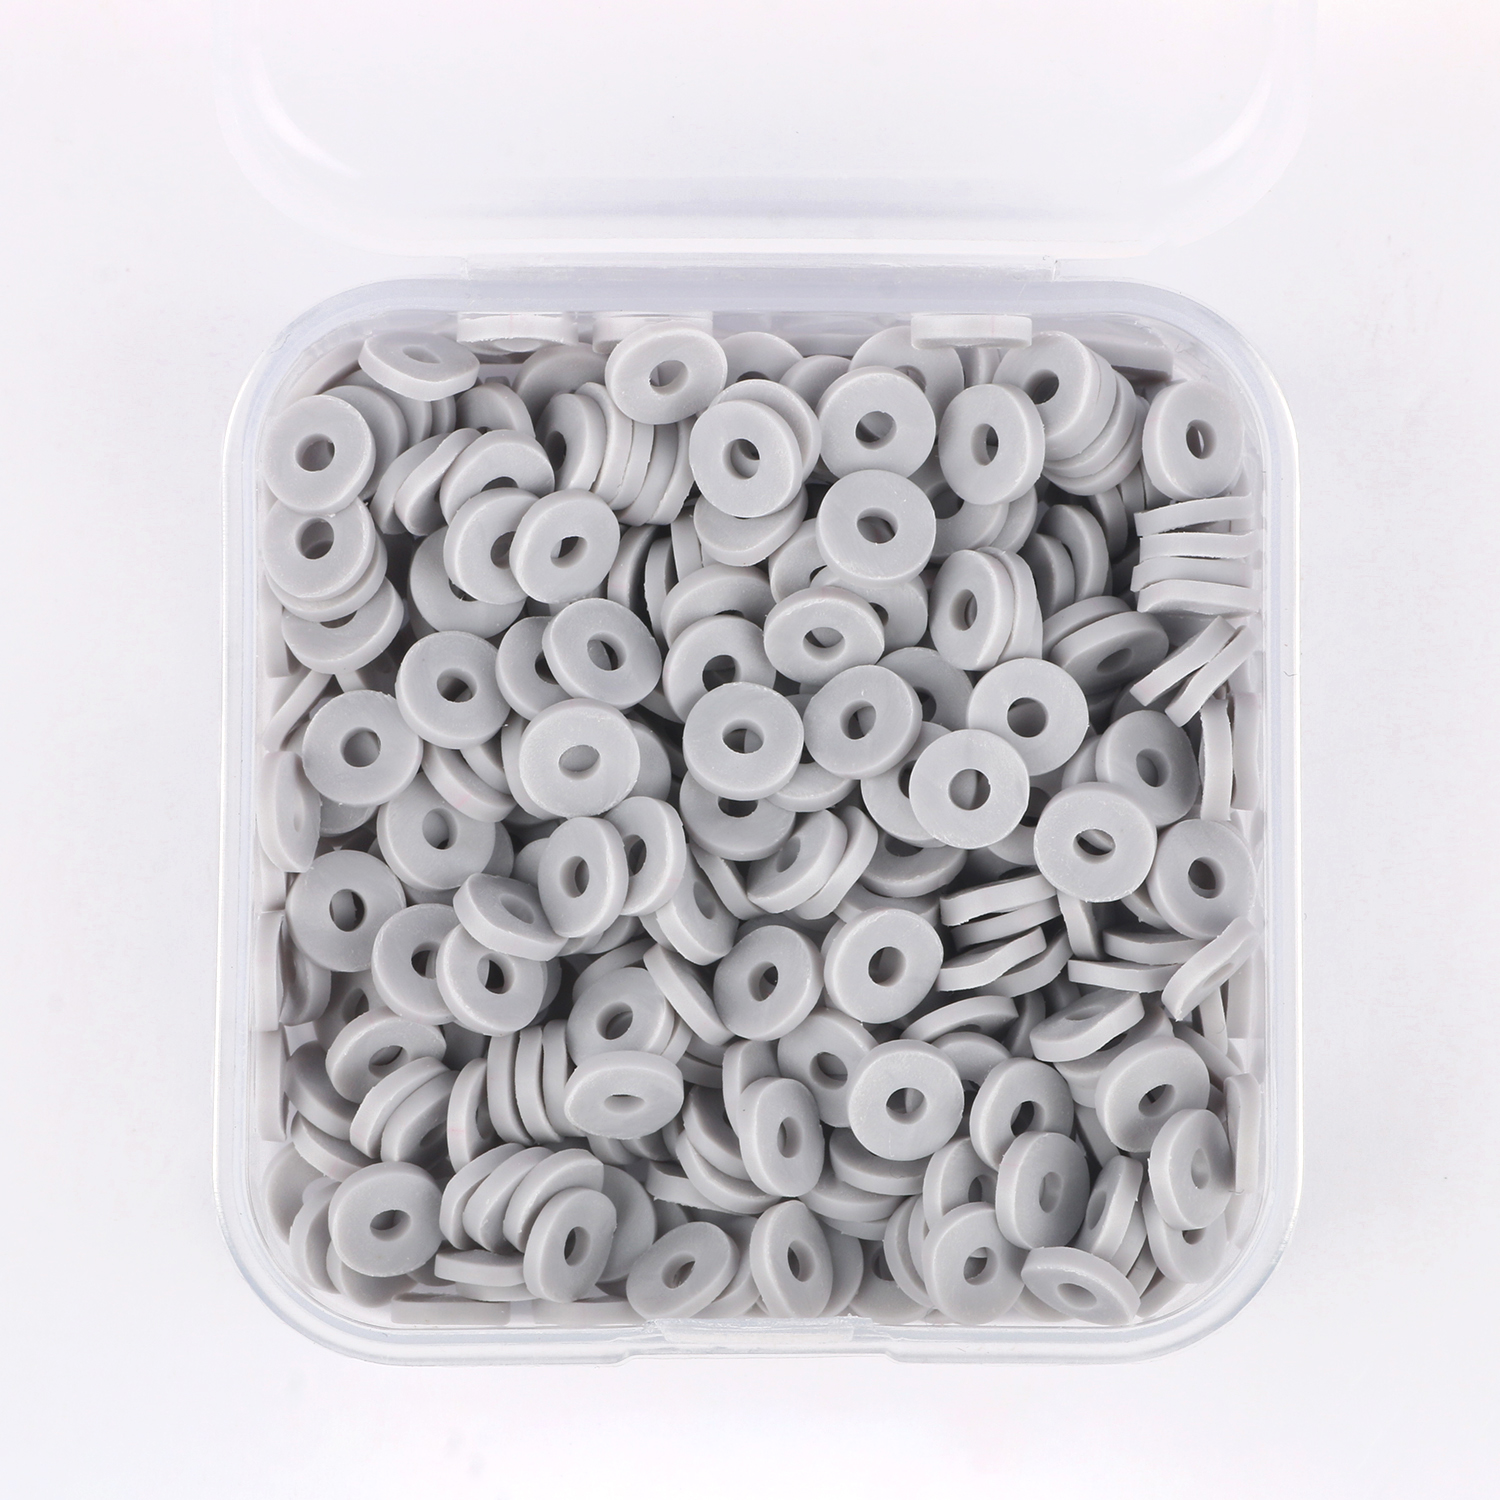 1000pcs 6mm Clay Beads with Box Package White Polymer Clay Beads for  Bracelets Necklace Jewelry Making (White)